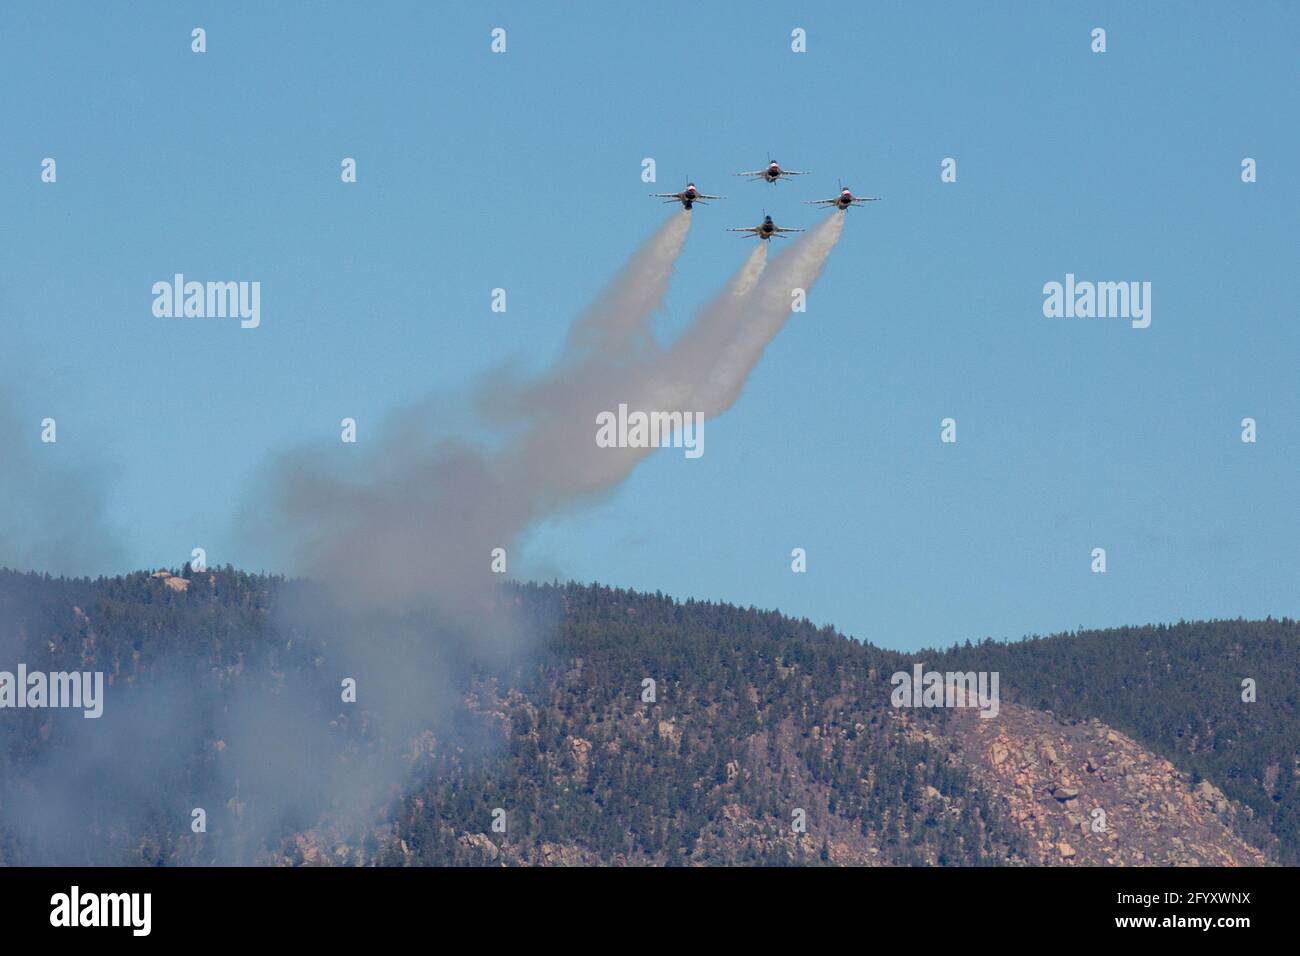 The USAF Air Demonstration Squadron Thunderbirds perform in Colorado Springs over the United States Air Force Academy. Stock Photo